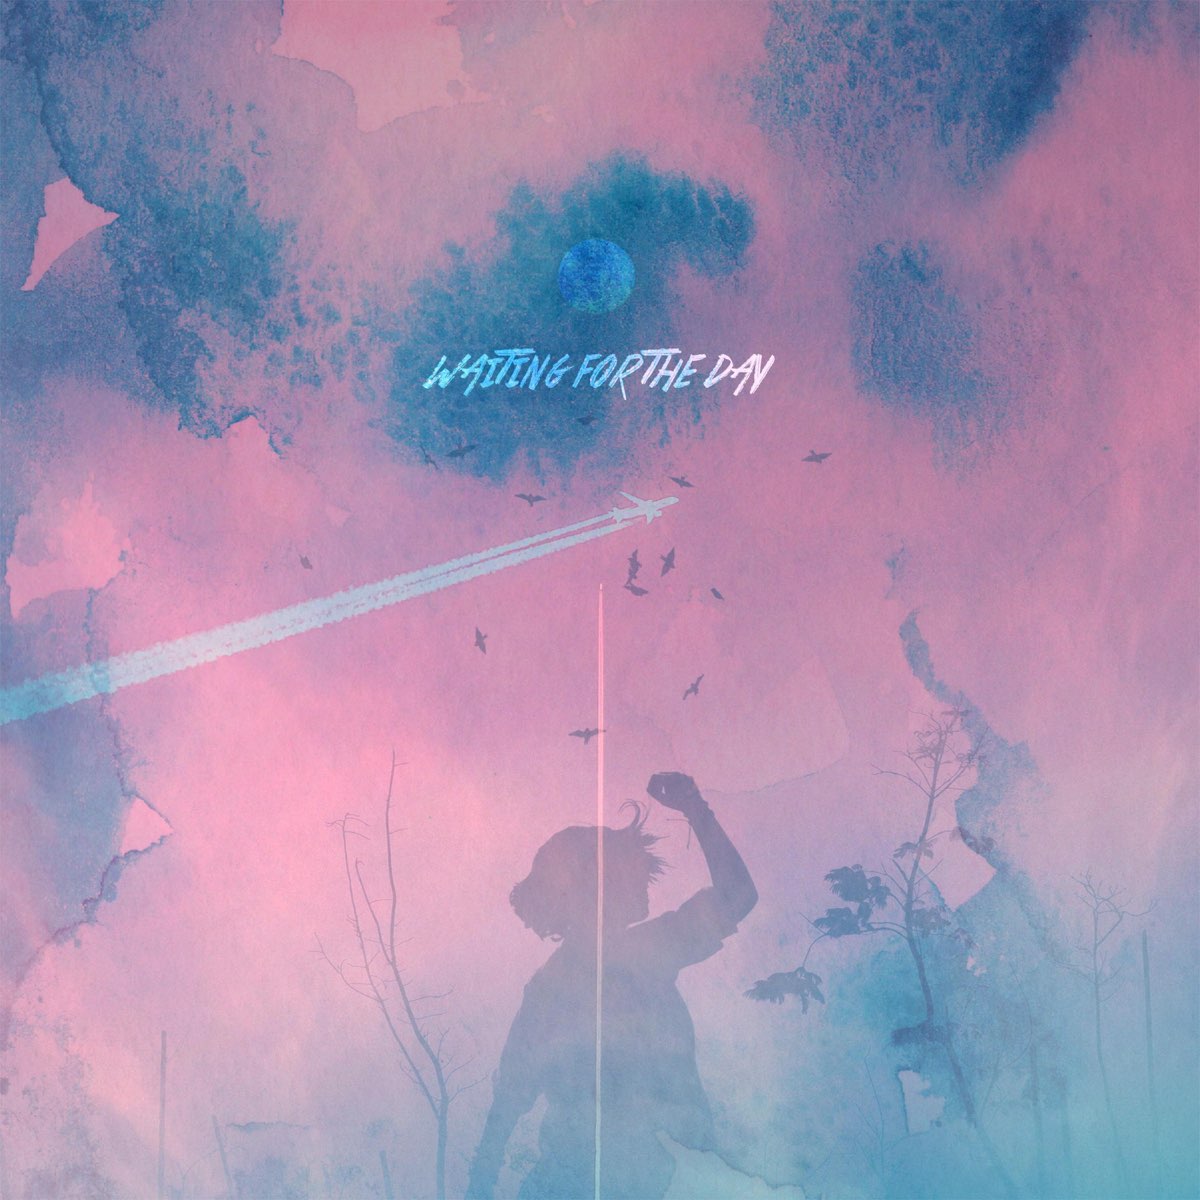 Waiting for the day (feat. Sunday Moon) - Single by Won Jang on Apple Music